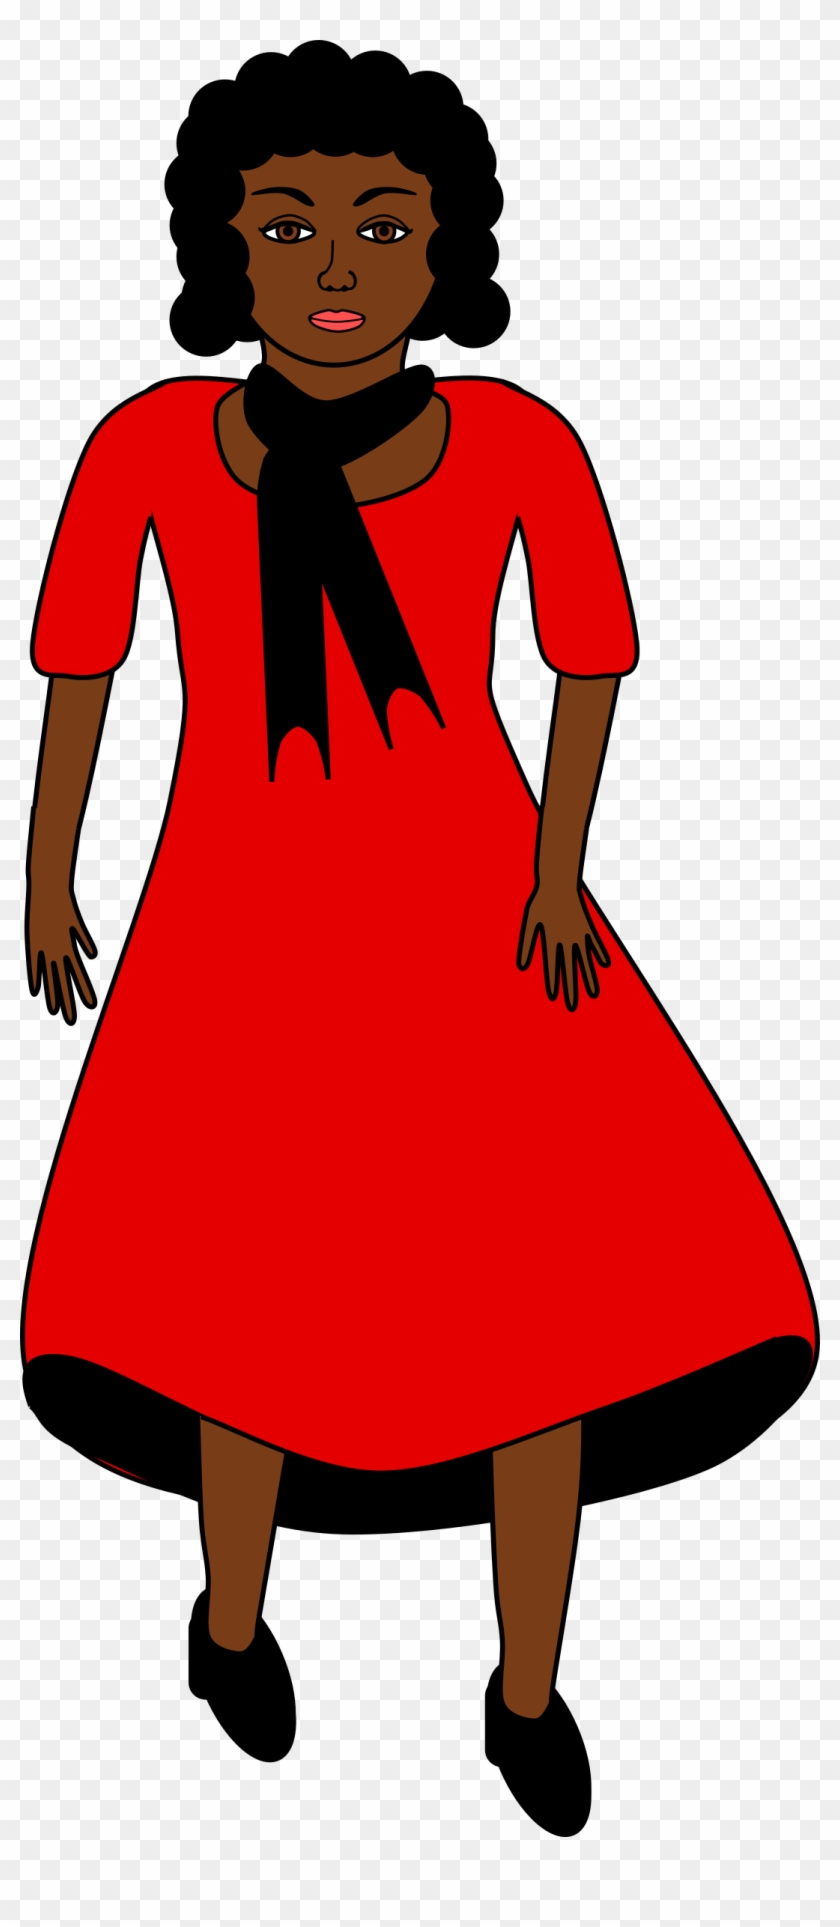 Dress In The Wind - Lady In Red Dress Clipart #306004